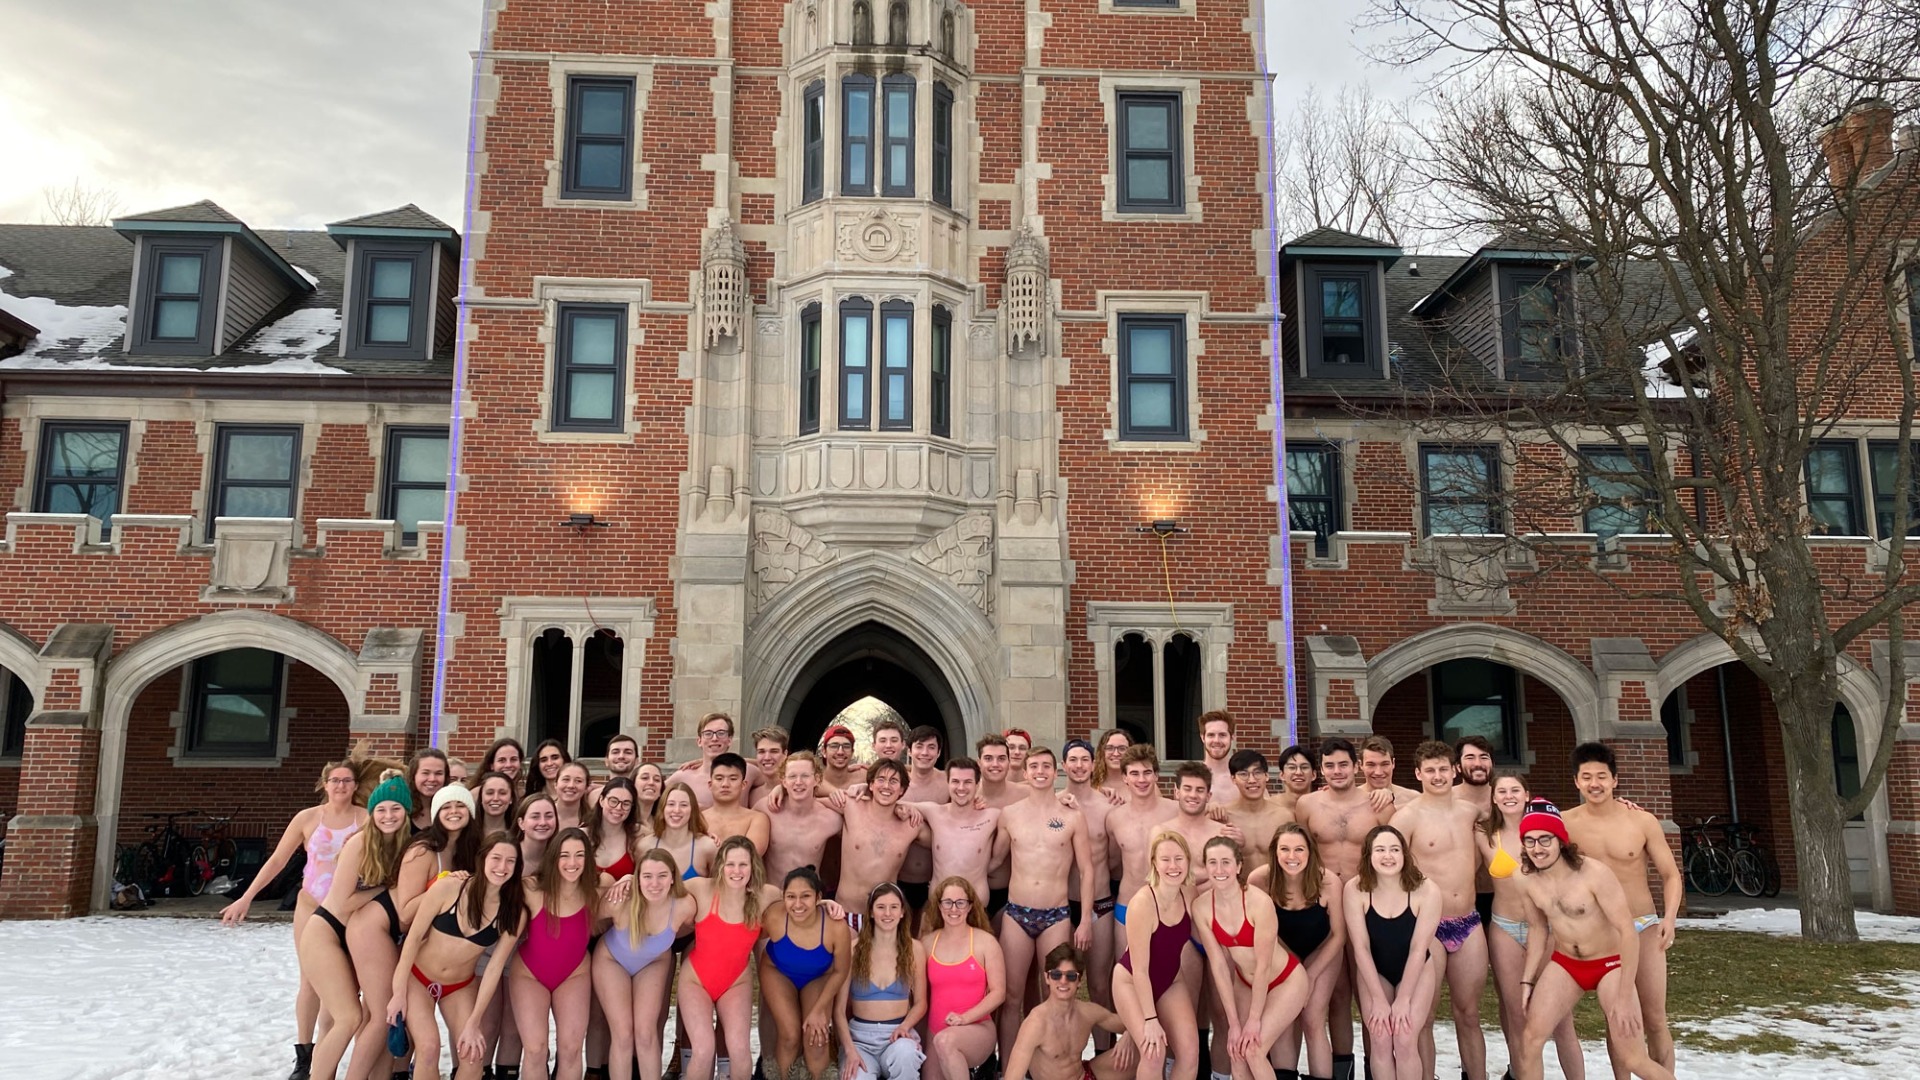 swim team in swimsuits and shoes outside Gates/Rawson with snow on the ground